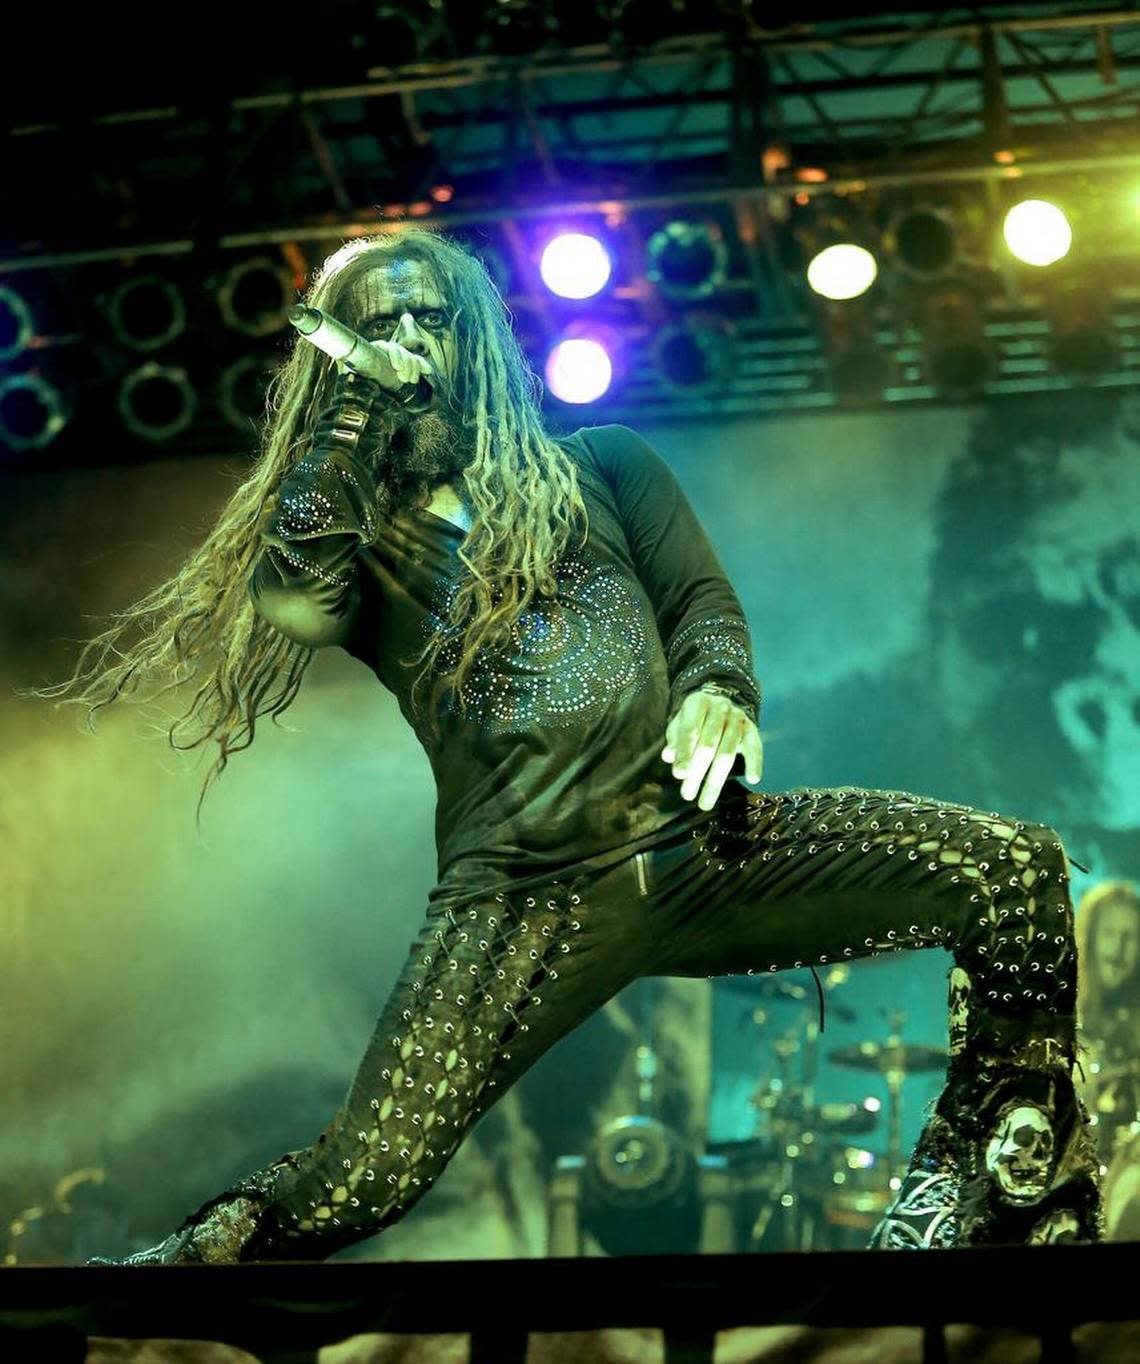 Rob Zombie will be joined by Alice Cooper for a concert Sept. 15 at the Azura Amphitheater.